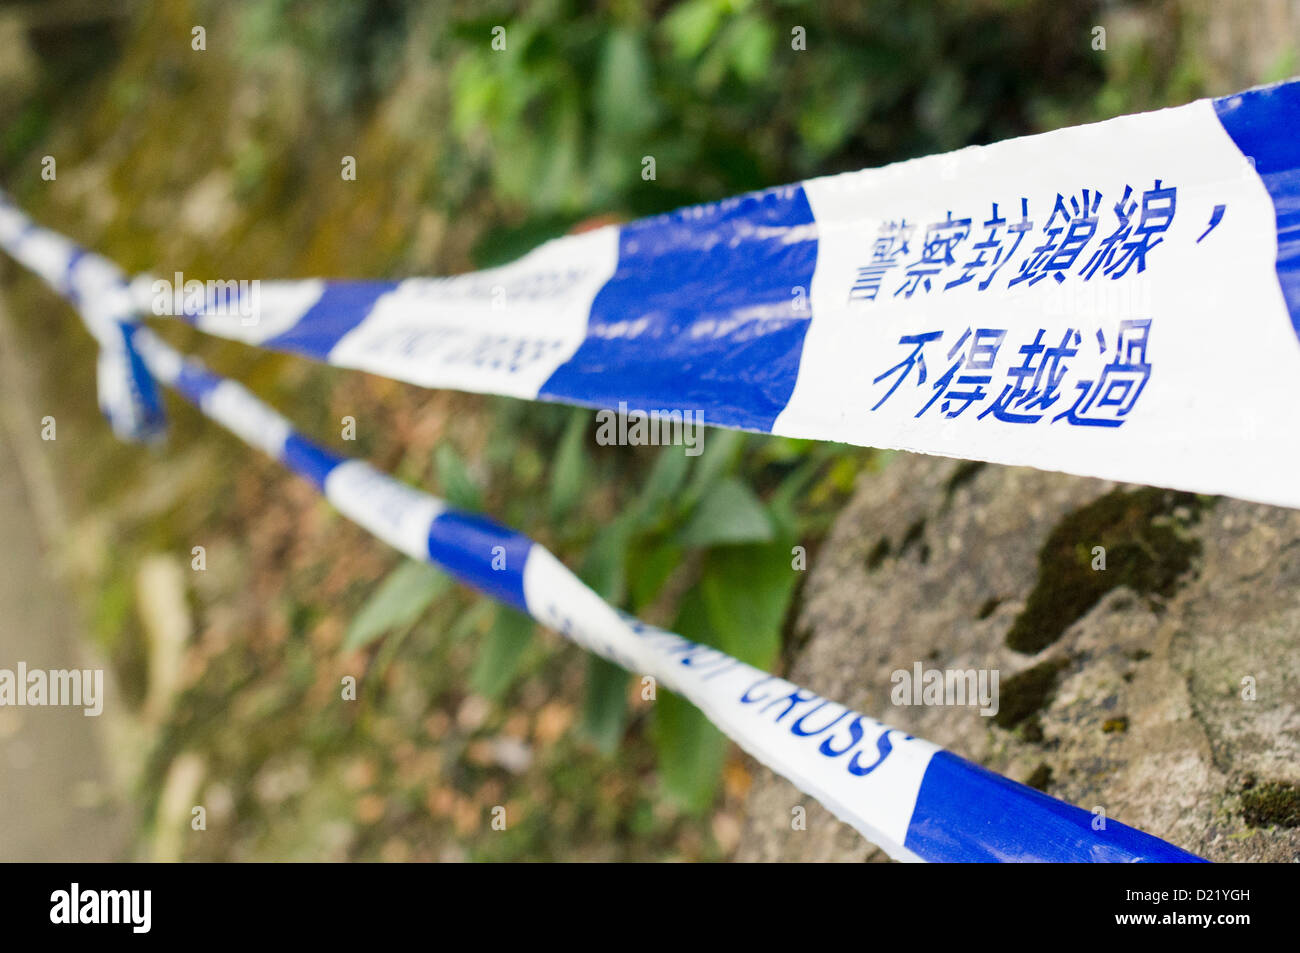 Police do not cross tape in an accident scene of land slide. Photo is taken at Hong Kong. Stock Photo